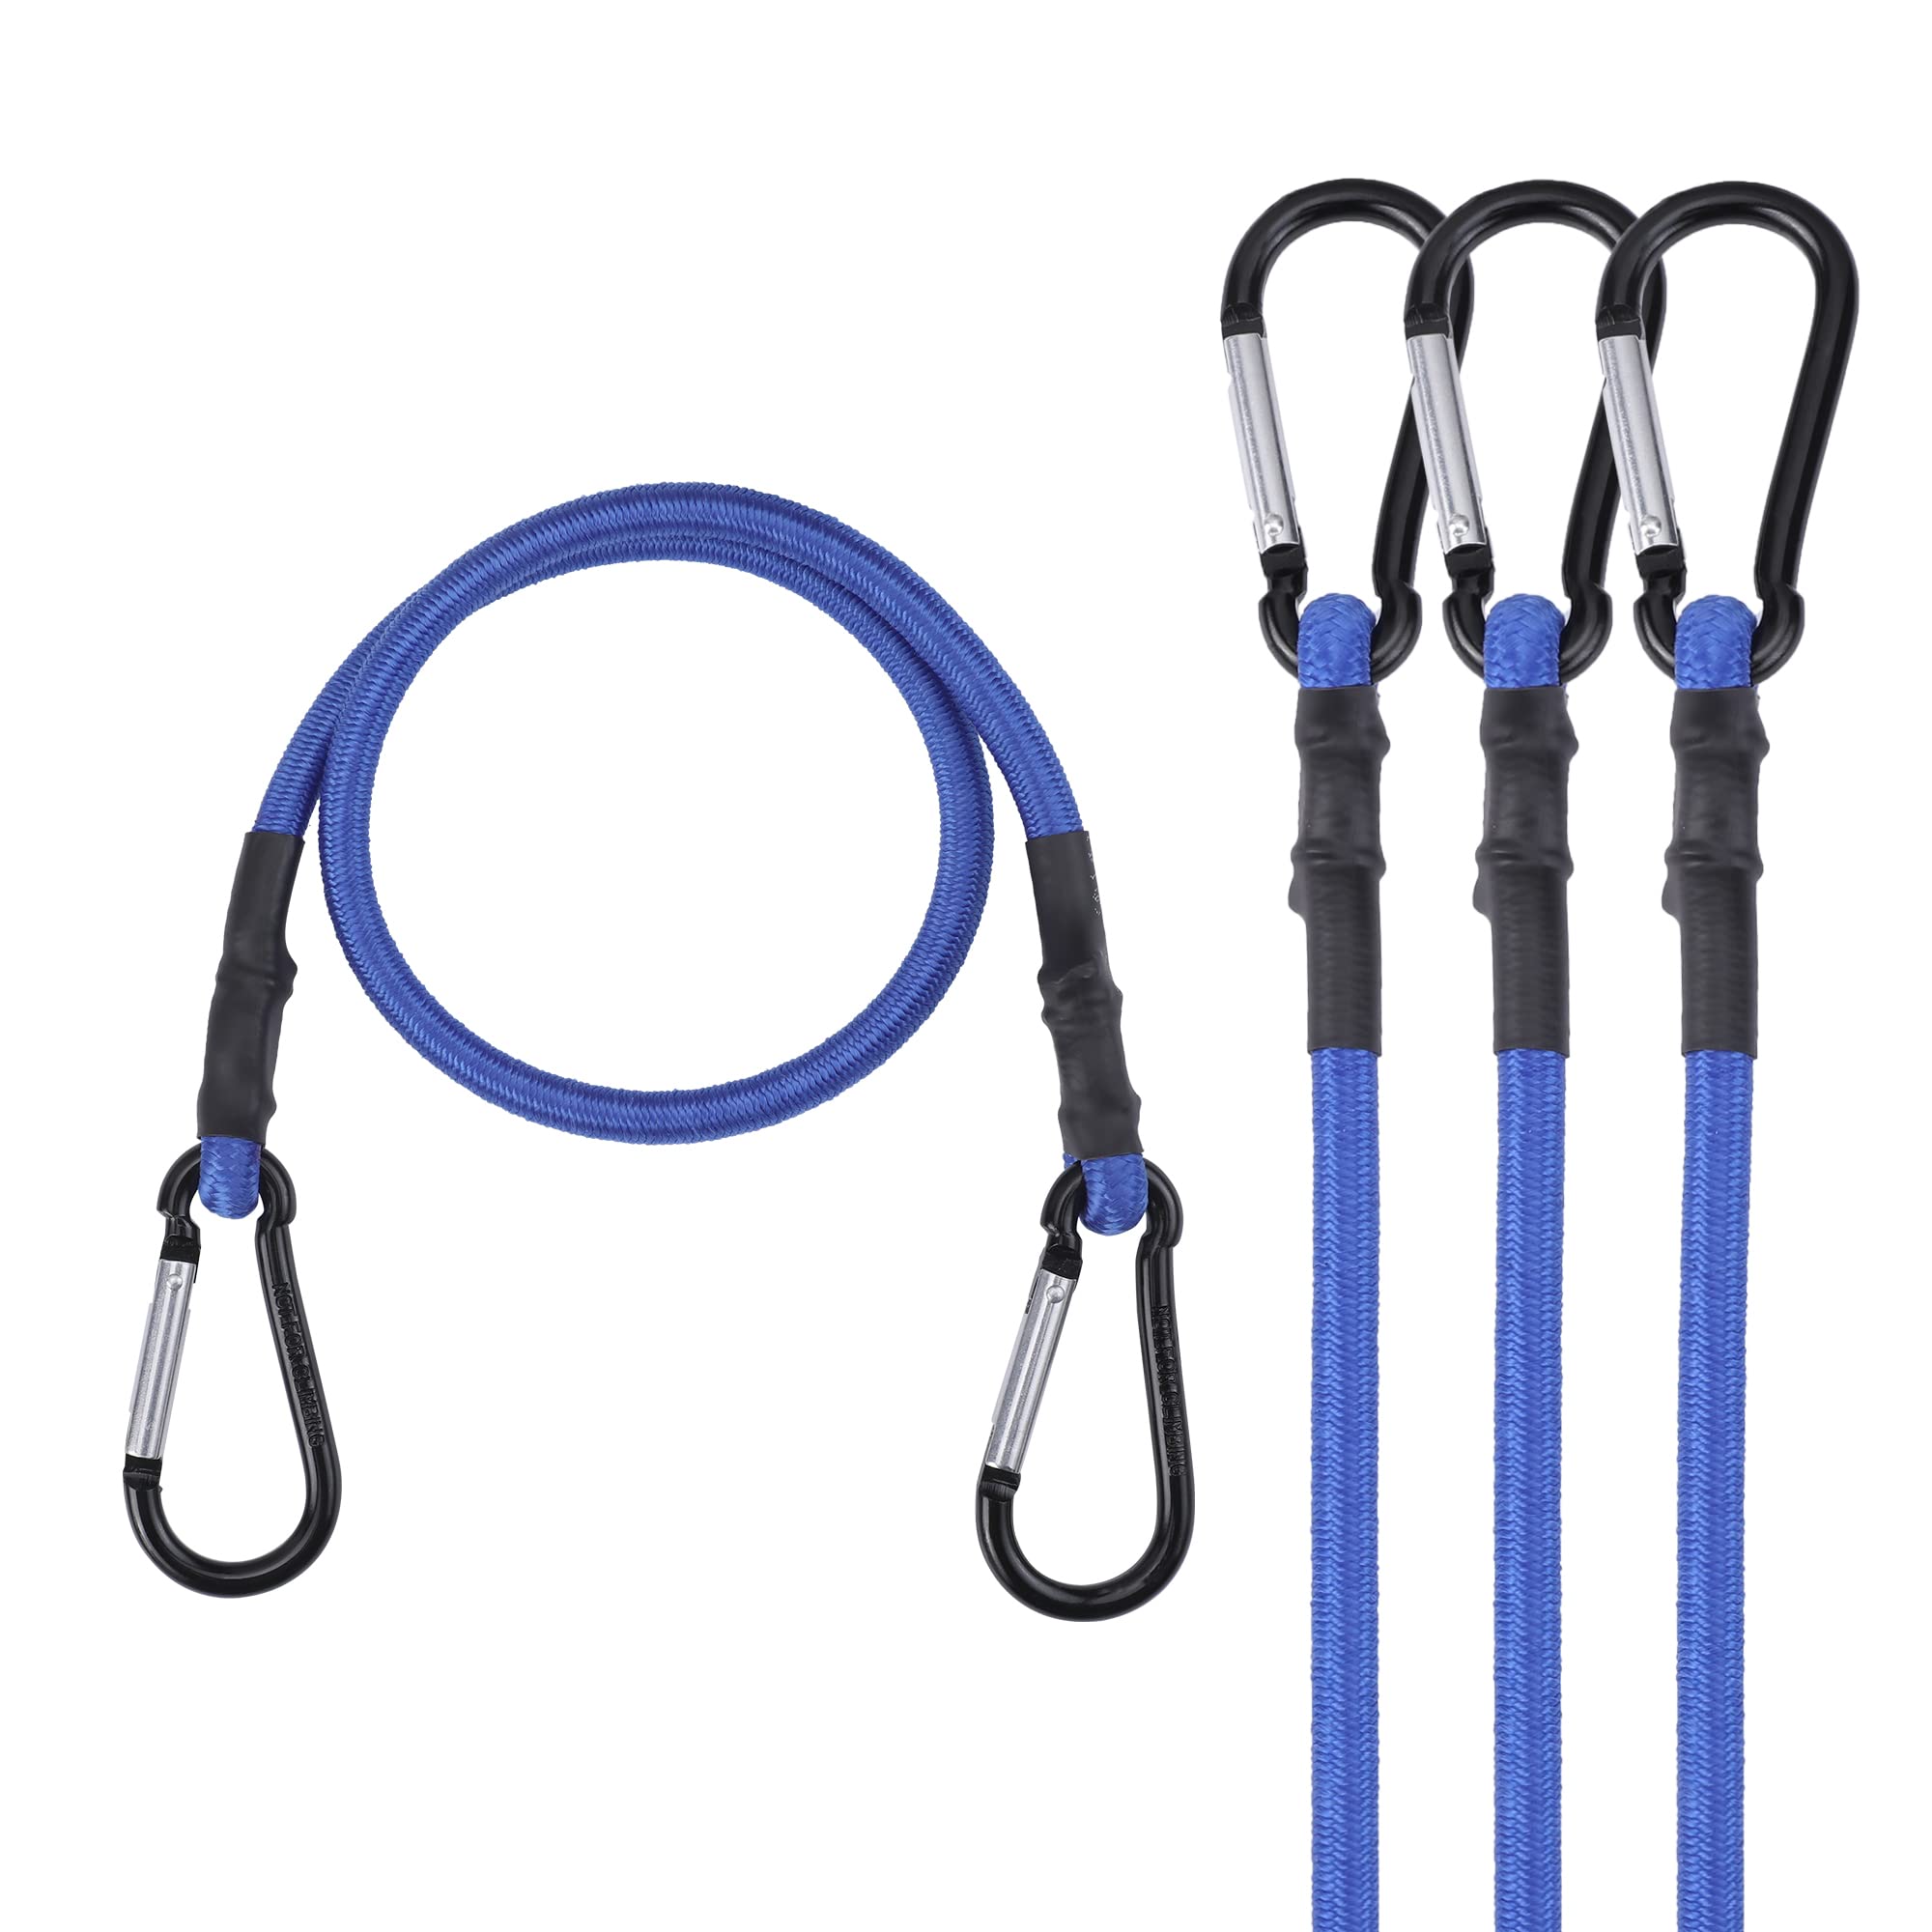 WORKPRO Bungee Cord with Aluminum Alloy Hook, 4 Pack Superior Rubber Heavy Duty Straps Strong Elastic Rope for Outdoor Tent, Luggage Rack, Camping, Cargo, Bike, Transporting, Storage (24Inch, Blue)